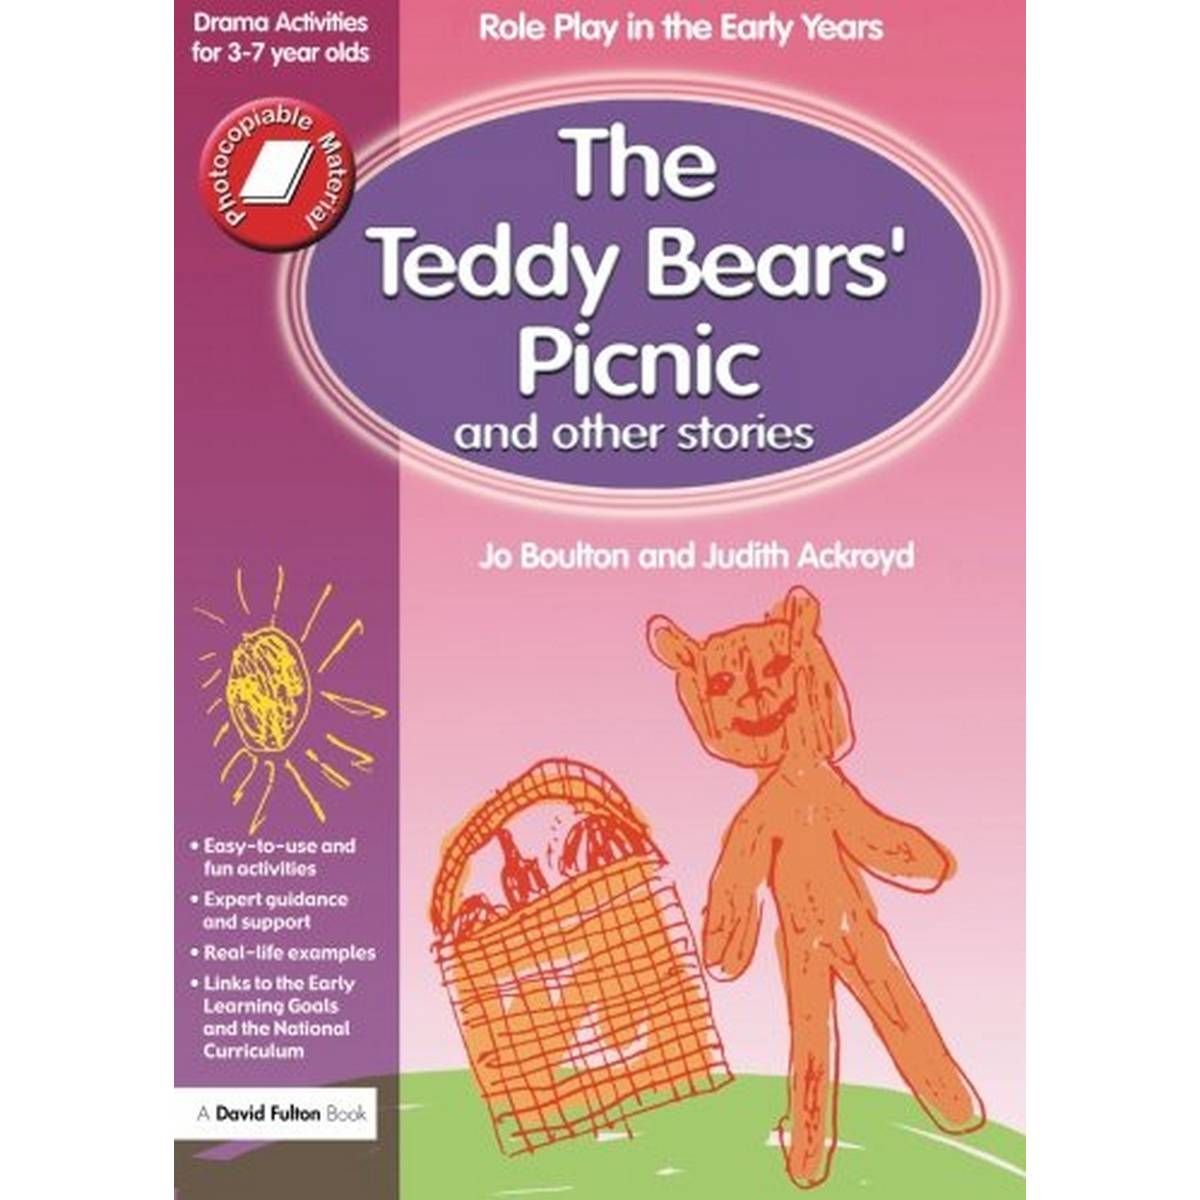 The Teddy Bears' Picnic and Other Stories (Role-play in the Early Years)